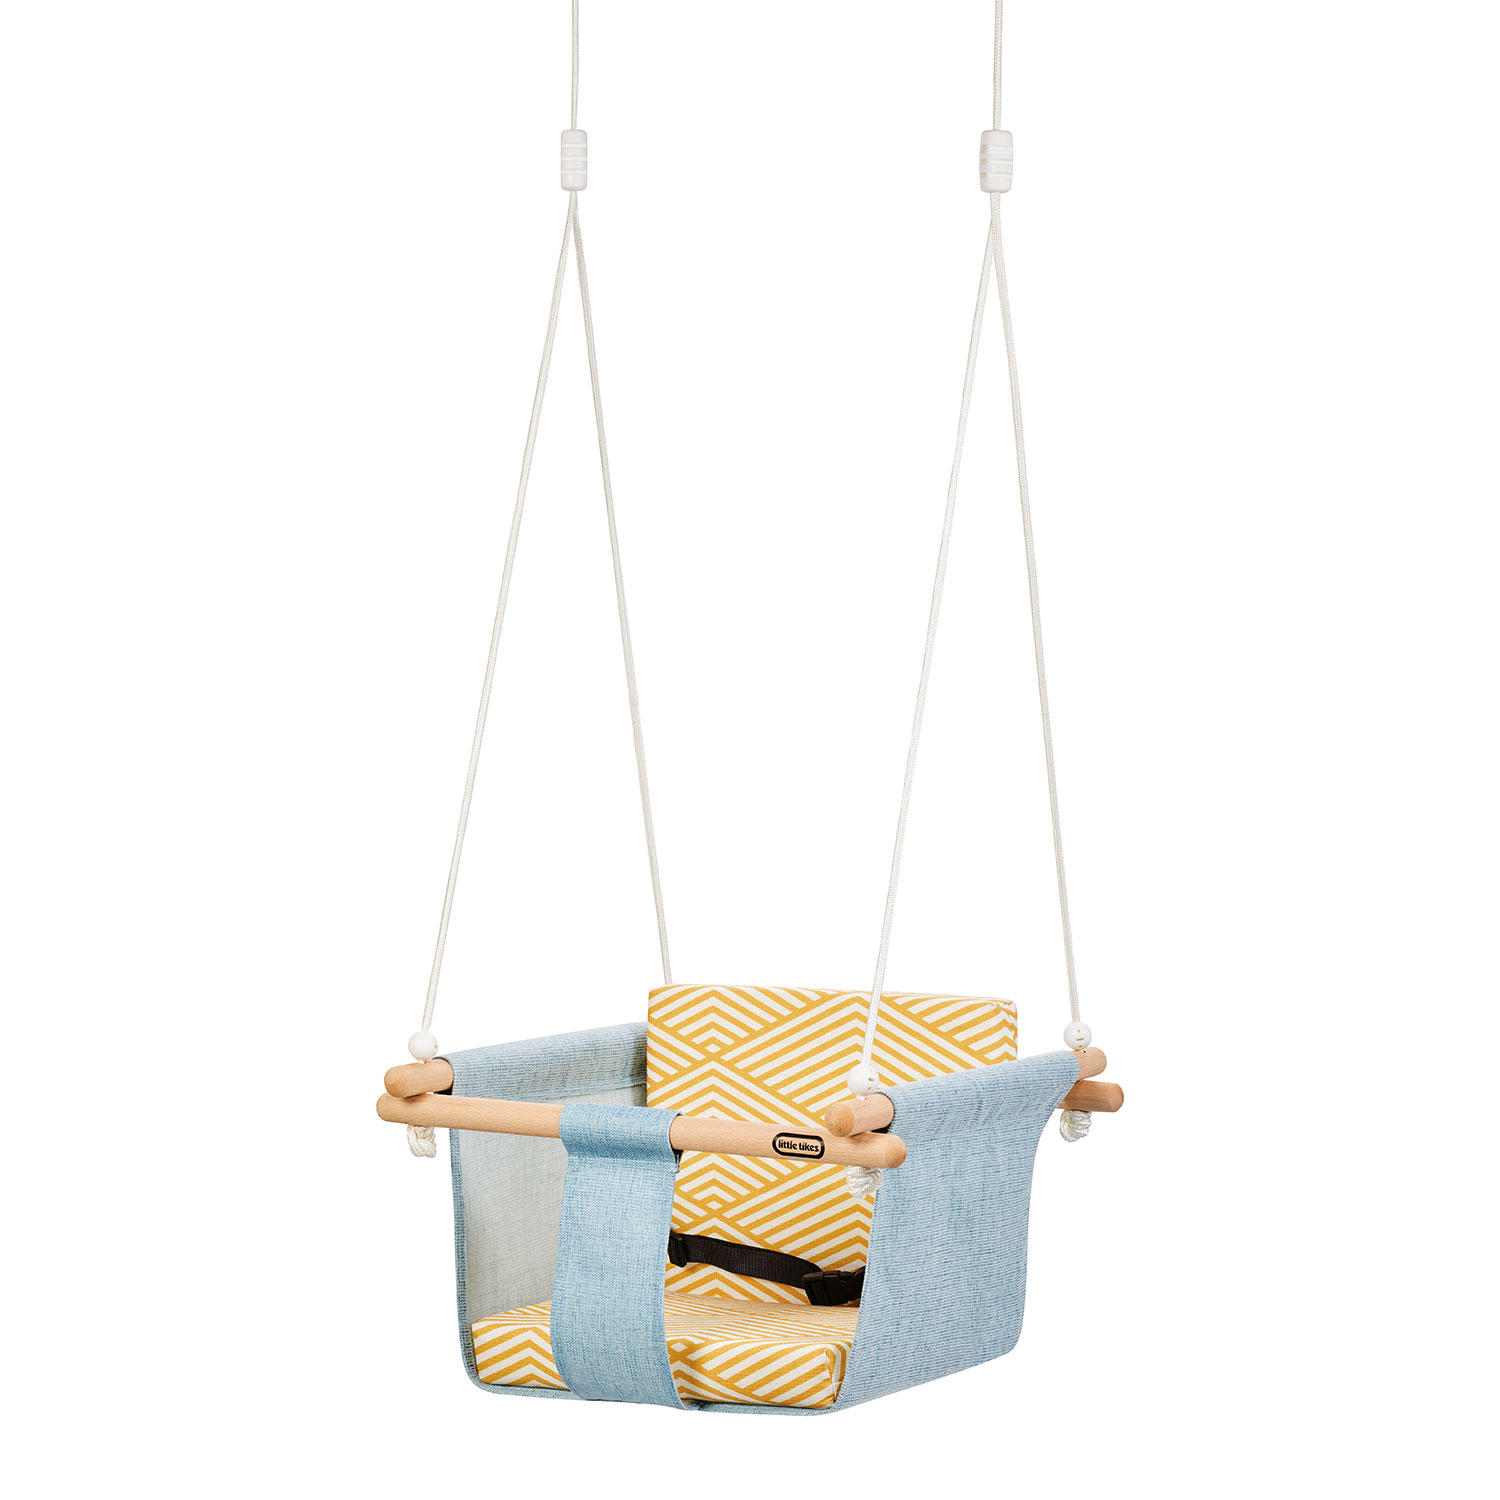 Little Tikes Wood Rockabye Nature Swing for $16.91